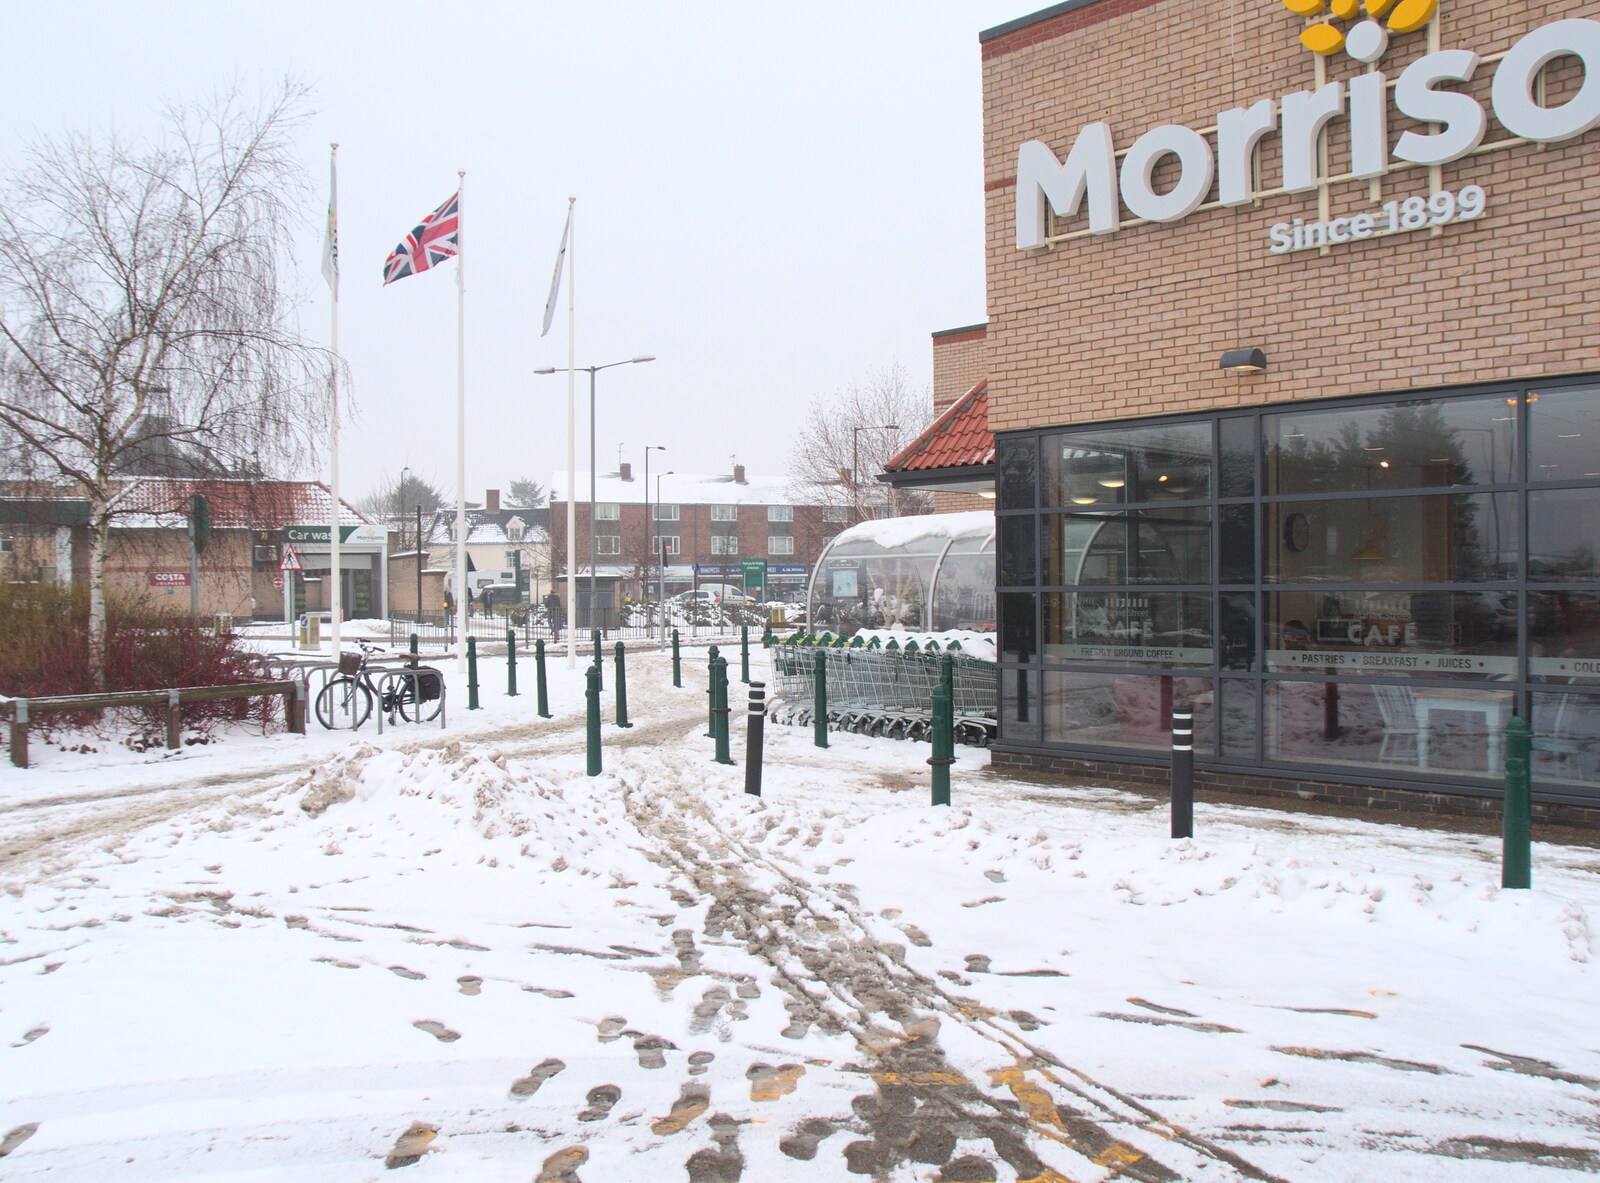 Morrison's in Diss from More March Snow and a Postcard from Diss, Norfolk - 3rd March 2018